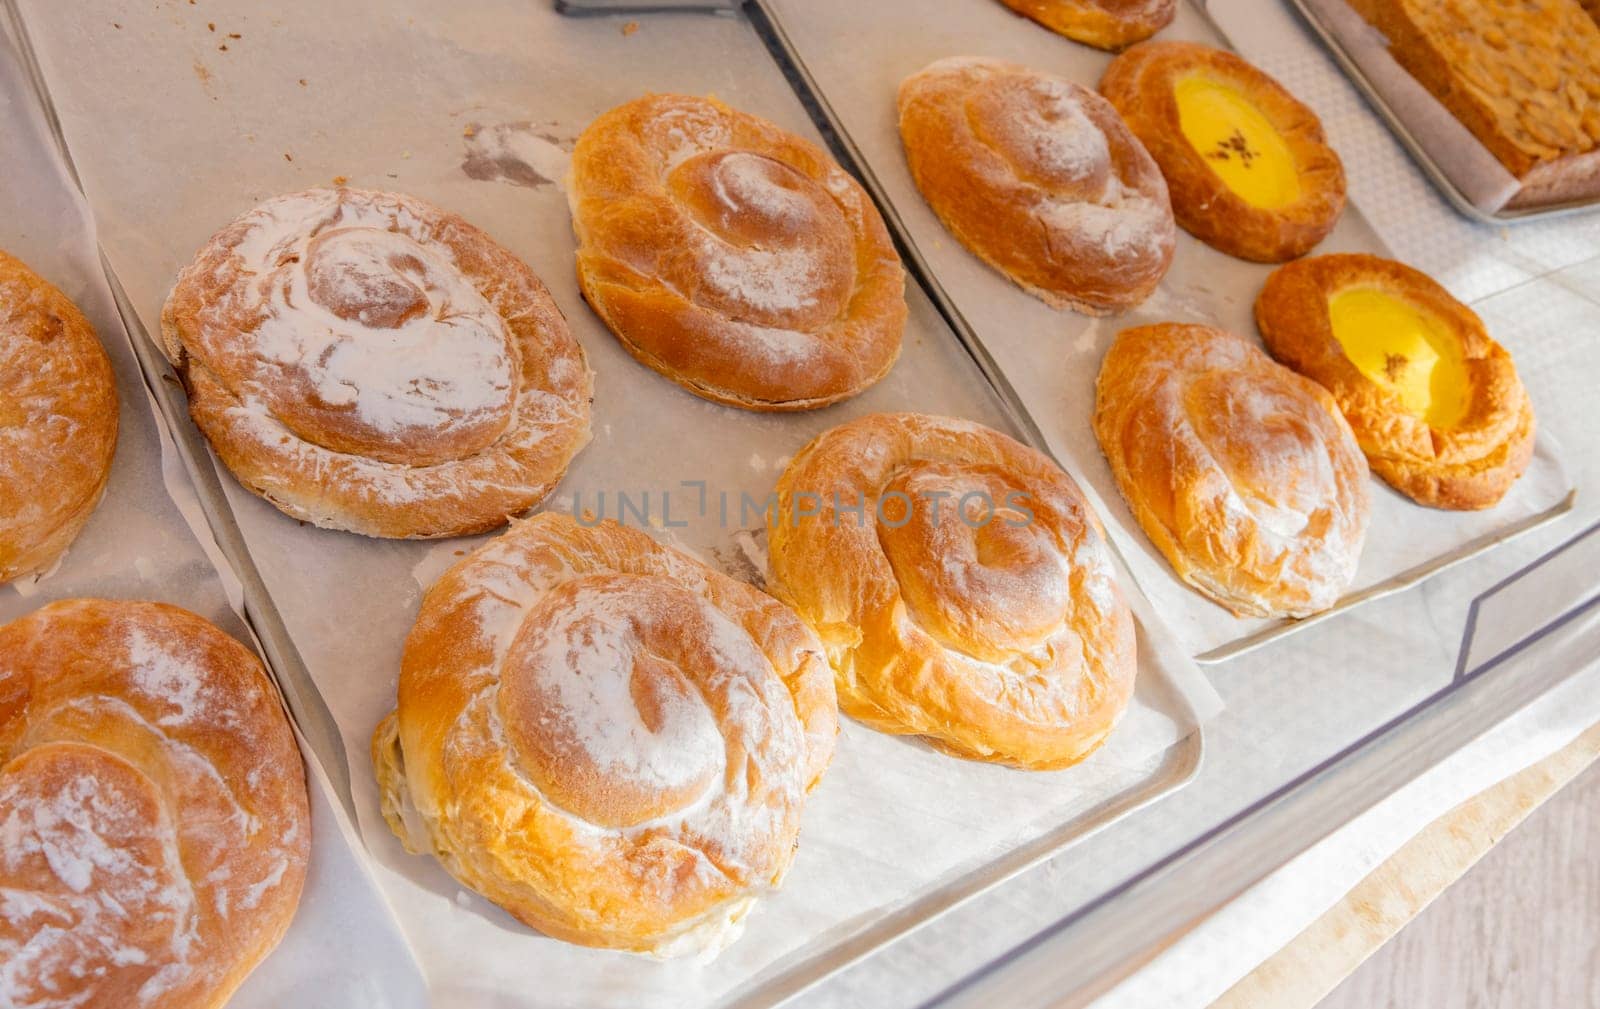 Flaky ensaimada pastries, one filled with bright yellow cream, on parchment